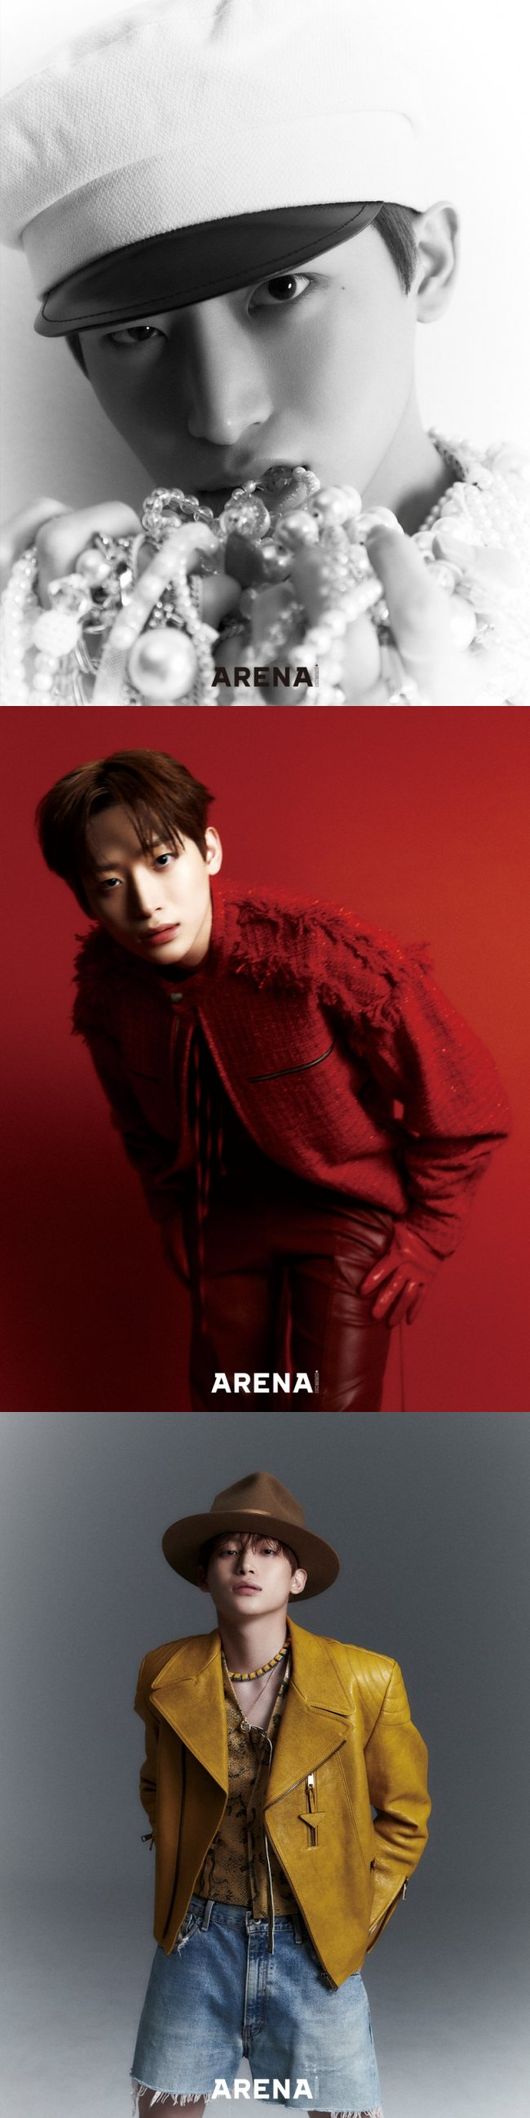 Group Cravity (CRAVITY) member Chung Mo showed an intense mood through the picture.Fashion magazine Arena Homme Plus released an interview with a pictorial with a sensual mood of Chungmo on the 24th.In the public picture, Chungmo completed a picture full of personality with more mature visuals and bold poses.Especially, from intense red color costumes to casual costumes with vintage feeling, various clothes were digested in their own style and showed the aspect of the next generation Photo artisan without hesitation.In an interview after the filming, Jung said, I want to do a stage and event that confronts (fans) like a fan meeting that does not have a lot of distance and a full performance of the audience.Chung also revealed the goals and hard minds Cravity dreams of: We want to make good progress at the end of the year and we want to do our own stage.I want to let you know that Cravity is different and cool. In addition, Chung Mo commented on his new album Liberty: In Hour Cosmos (LIBERTY: IN OUR COSMOS) and It is an album with a lot of love for Rubiti (official fan club name).If you have shown Cravitys wonderful personality and aspirations with previous songs and stages, this album is a more lyrical song. If I showed a performance until last year, I want to communicate more closely with Rubbiti like the mood of the new album this year, he said.More pictures and interviews of Chungmo can be found in the Arena Homme Plus March issue, official website and SNS.Arena Homme Plus Offered